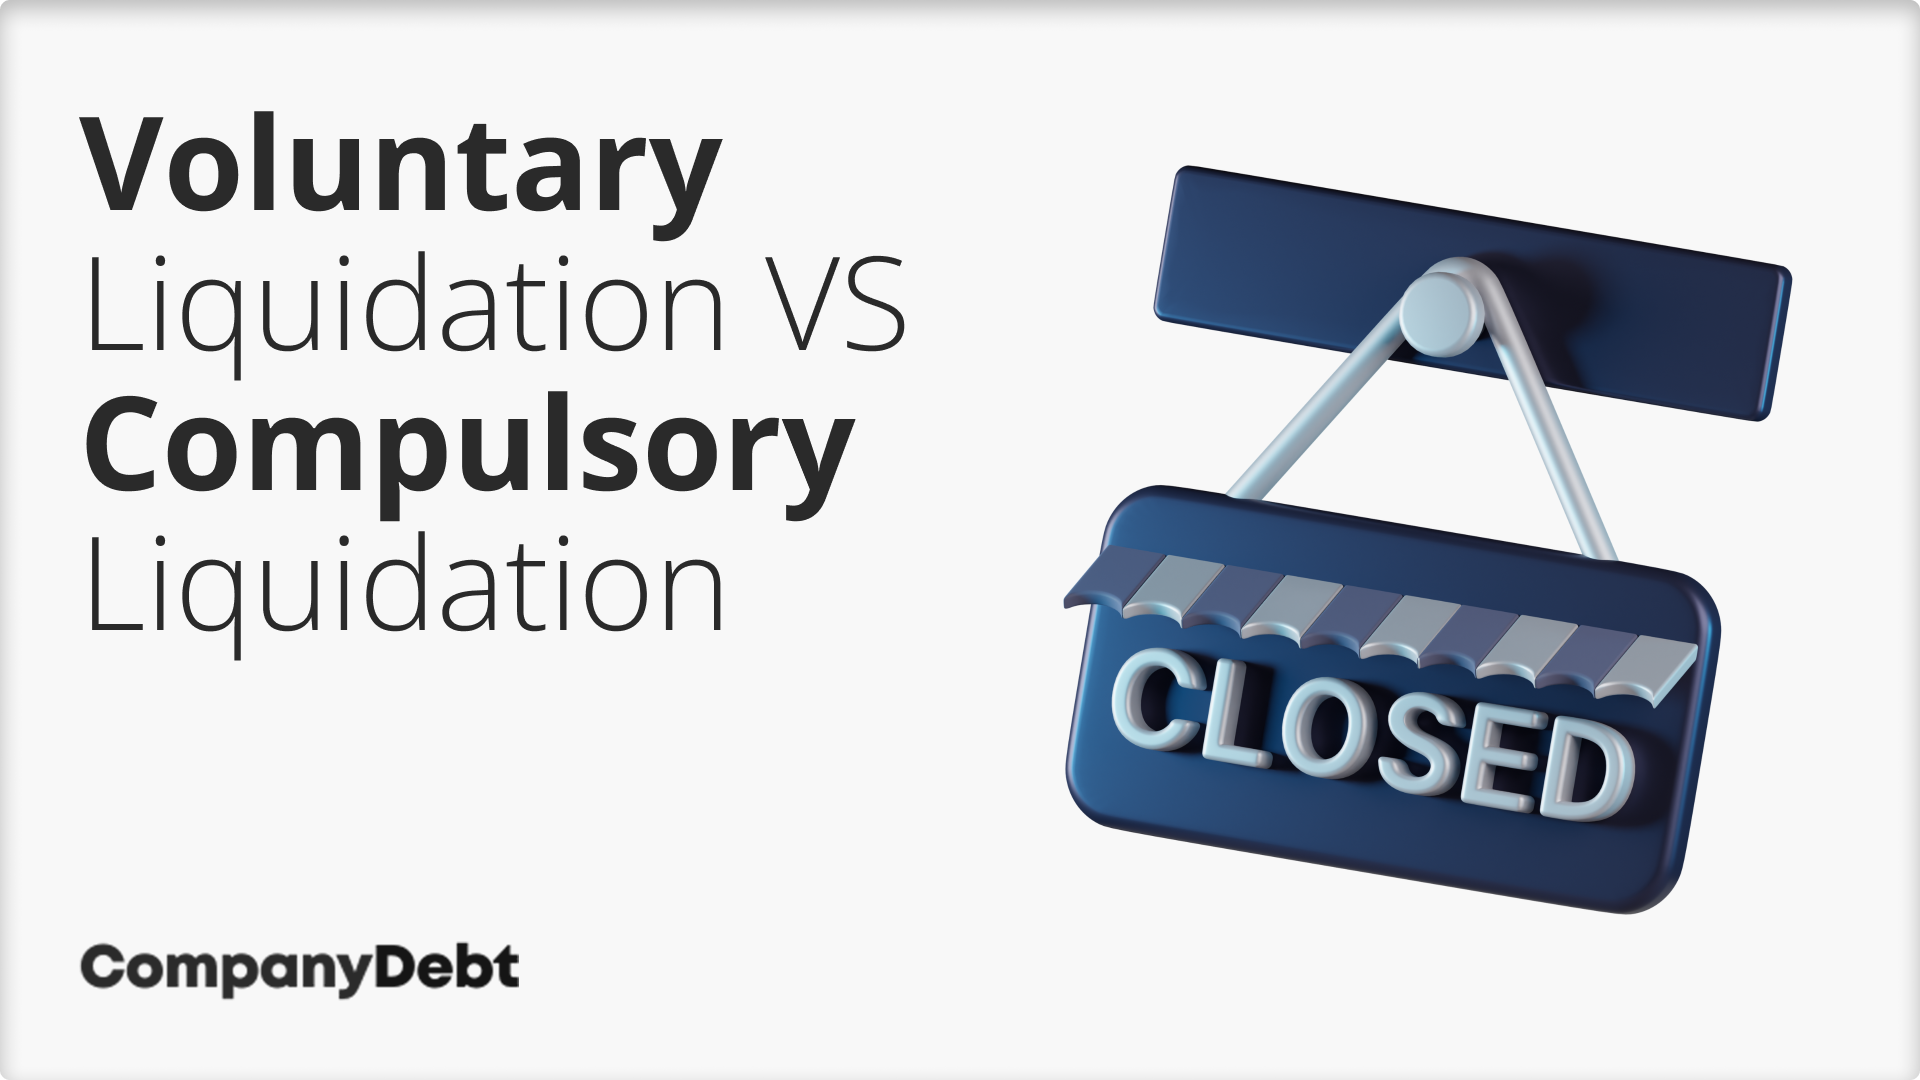 What is the Difference Between Voluntary Liquidation and Compulsory Liquidation?